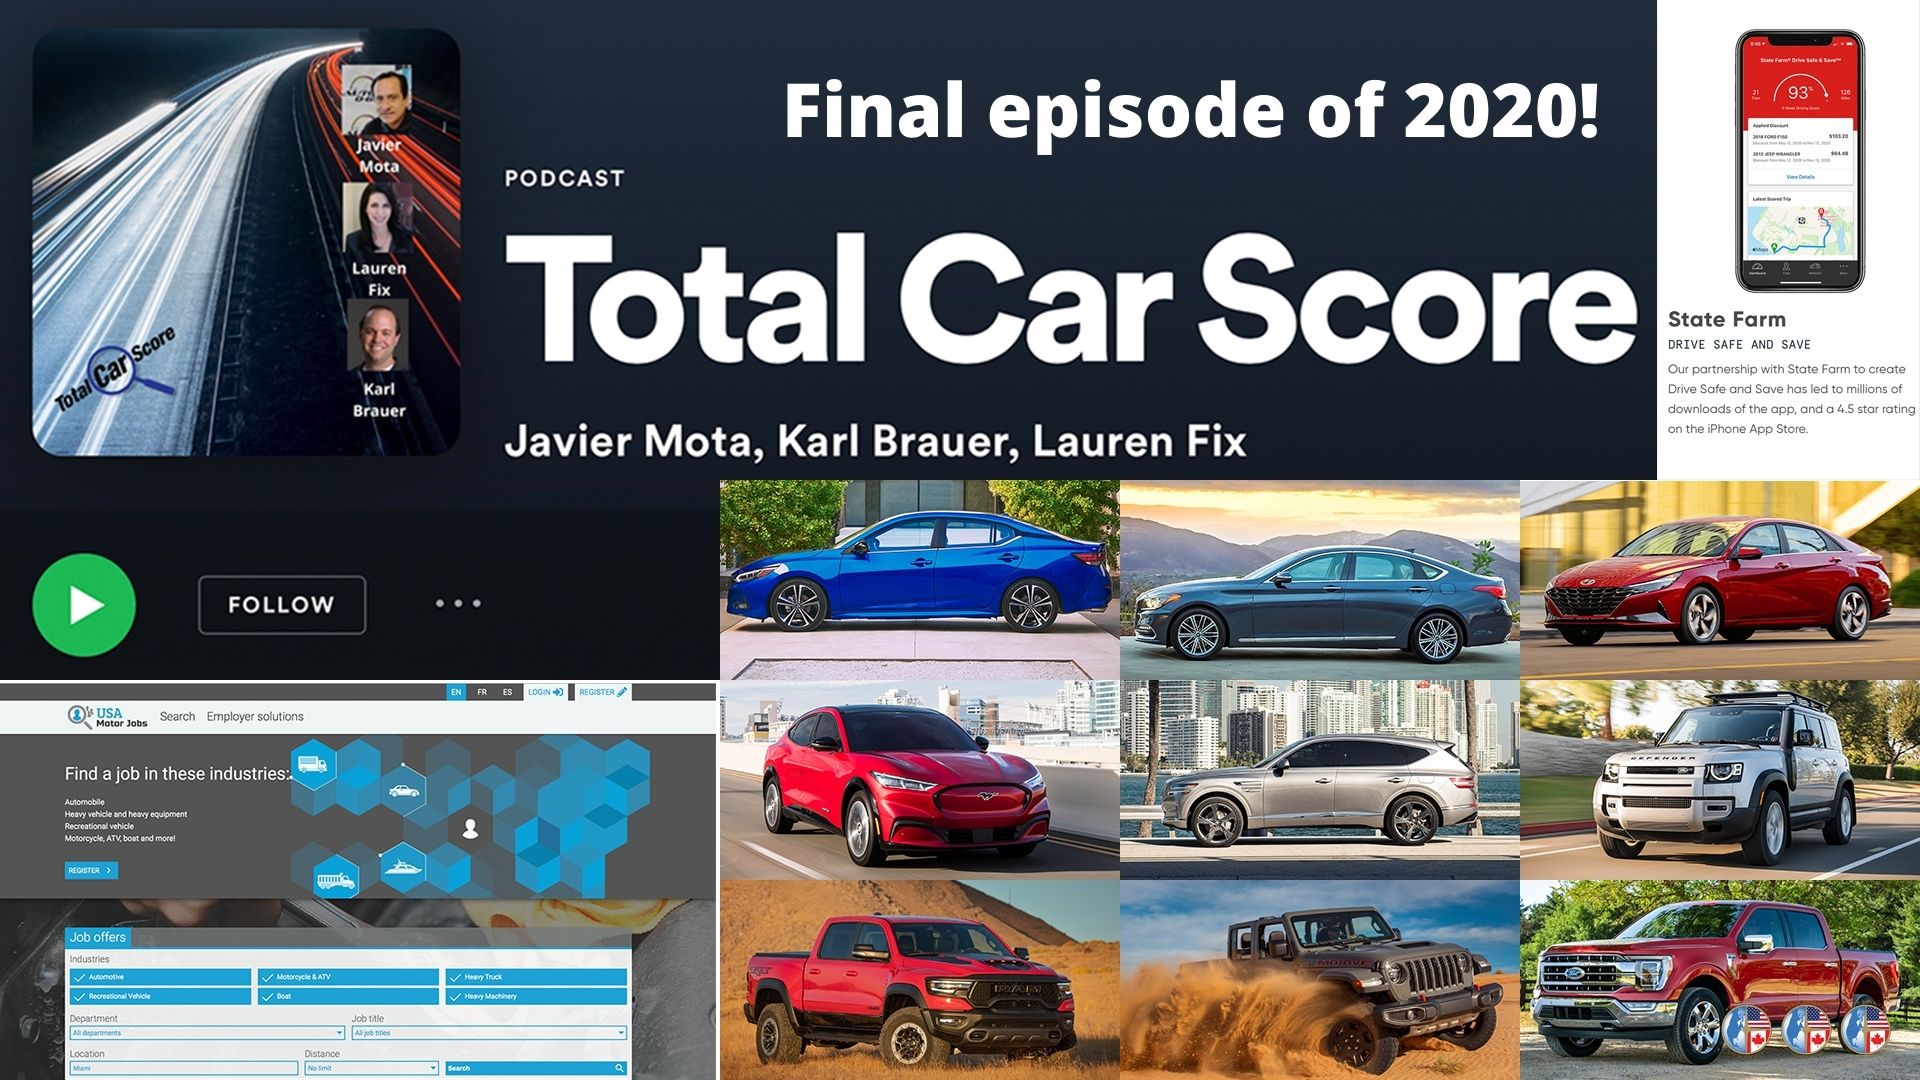 Total Car Score Podcast - The final show of 2020!